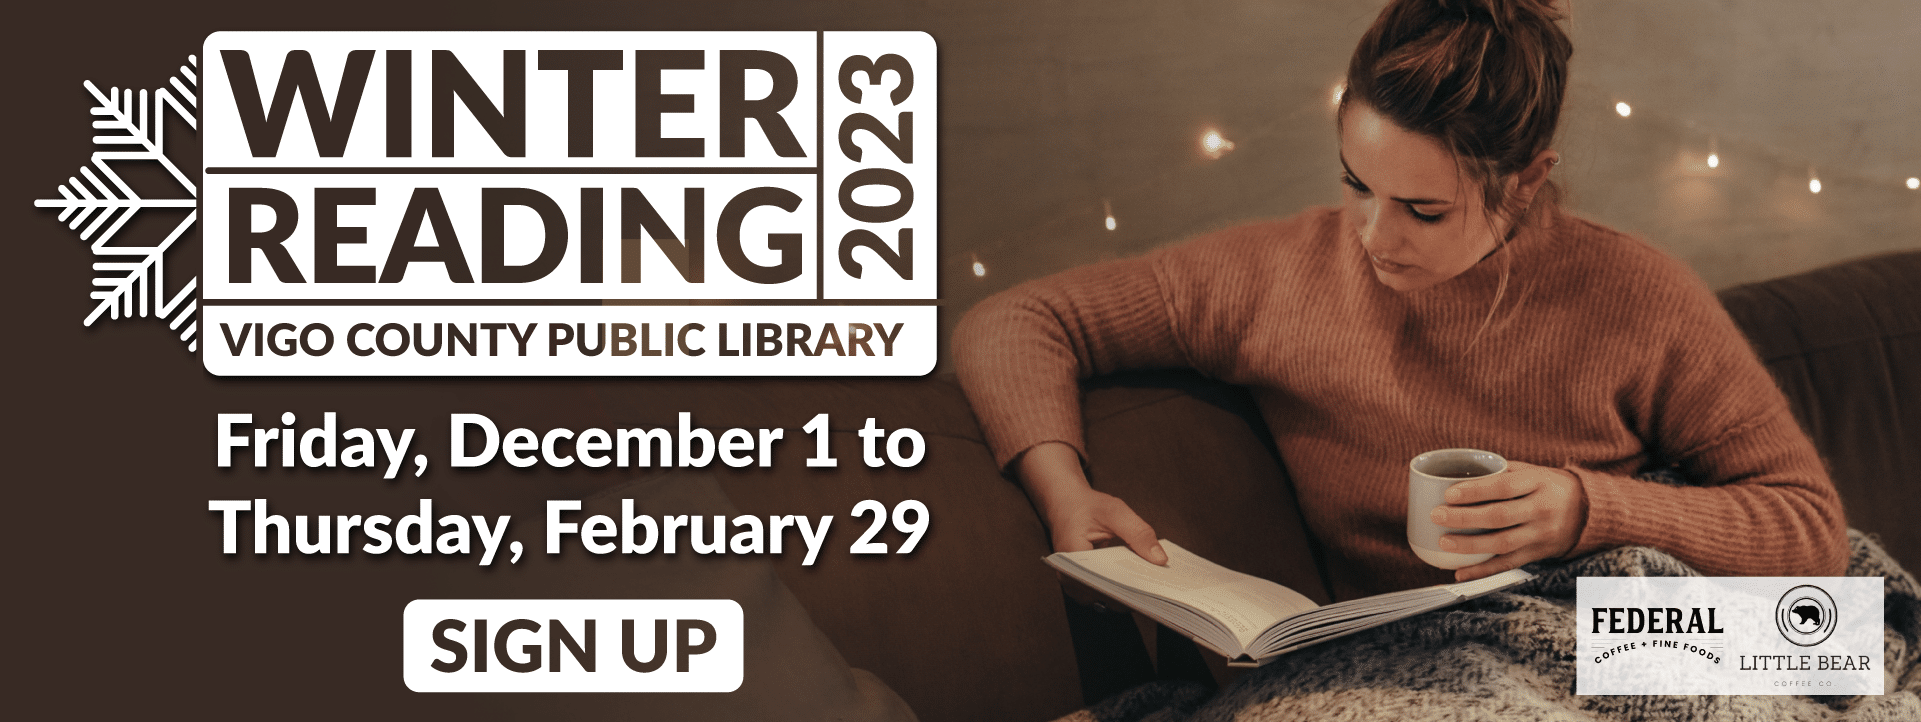 Winter Reading Promo Image. Winter Reading 2023 starts December 1 and ends February 29. Sign up by clicking here.